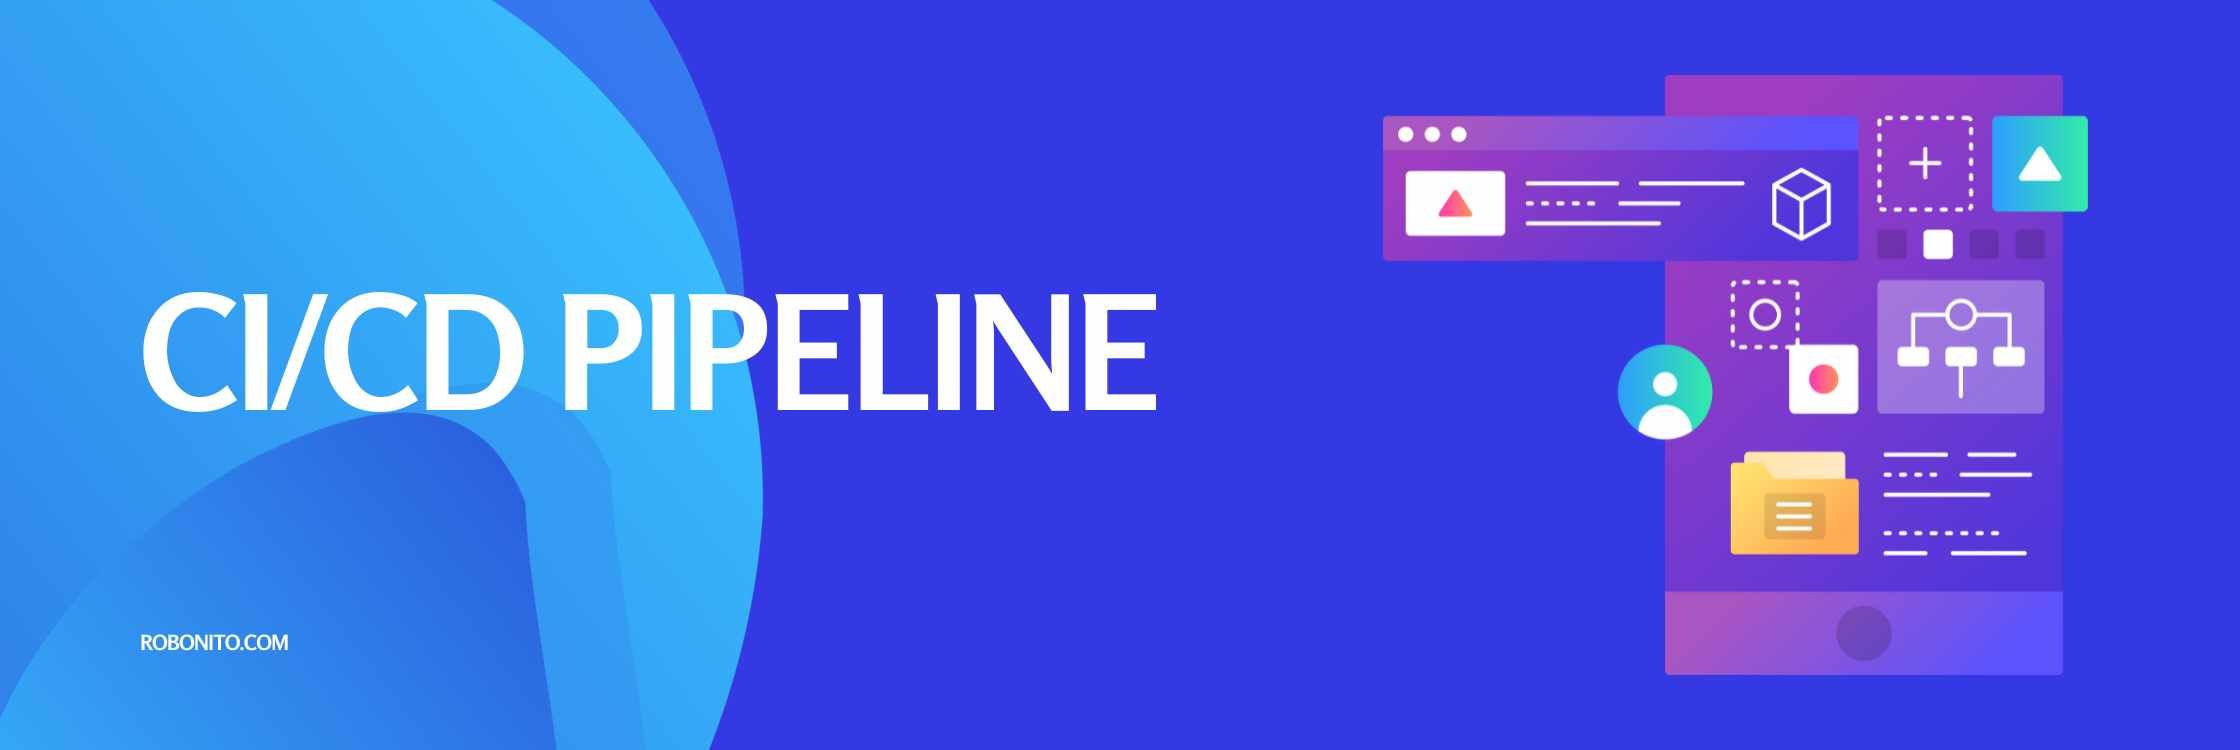 What is CI/CD Pipeline?